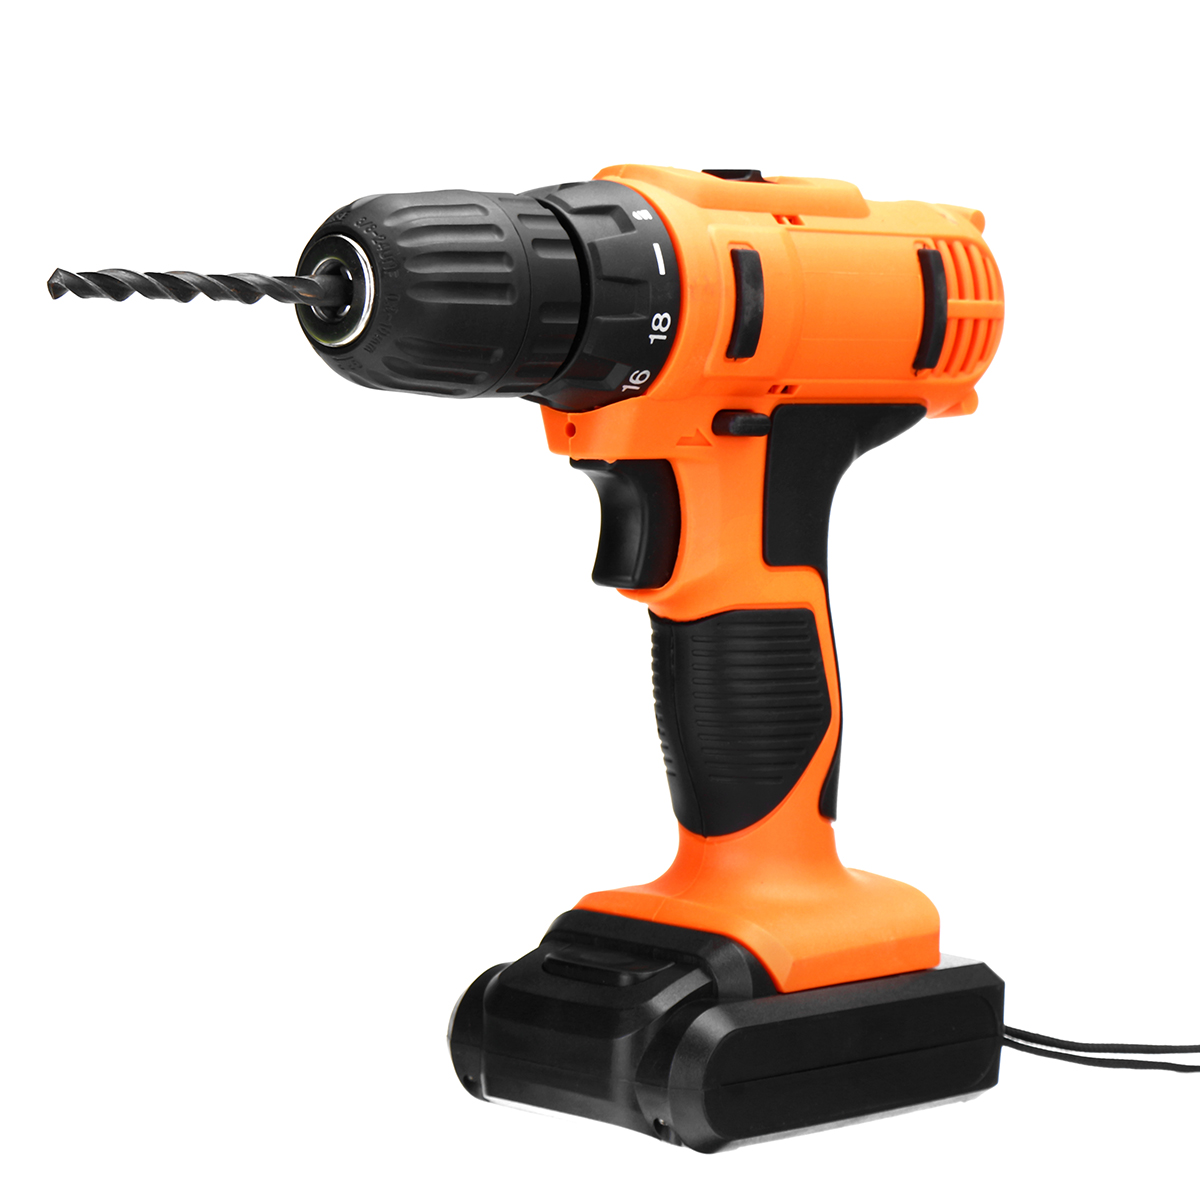 18V-Electric-Screwdriver-Cordless-Hammer-Impact-Power-Drill-Driver-Rechargeable-with-13Pcs-Drill-Bit-1324472-5